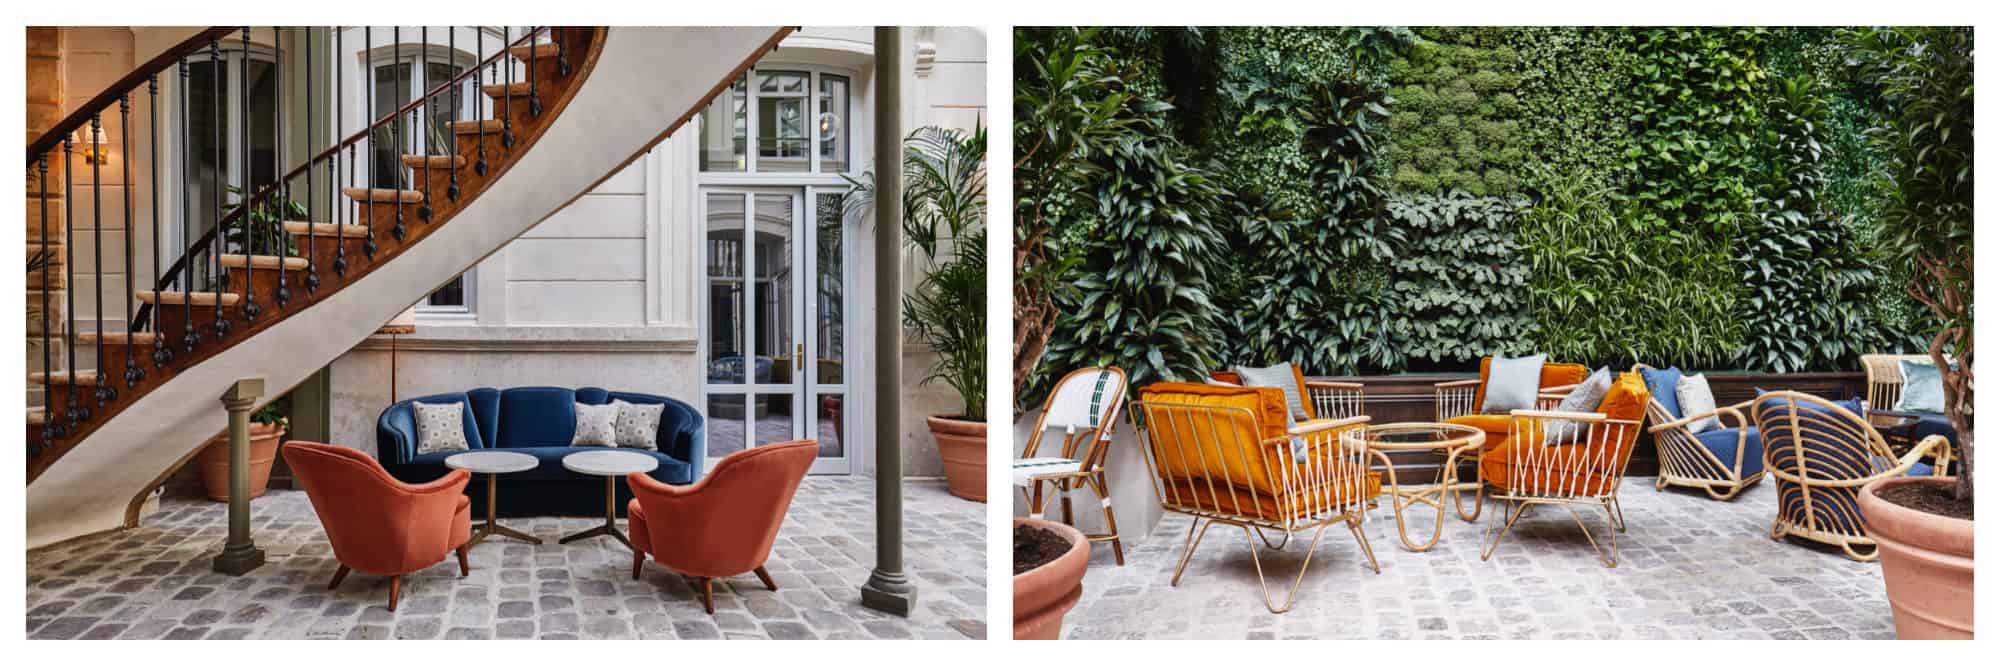 The iconic staircase at the Hoxton Paris Hotel (left) and the green wall at the hotel (right).